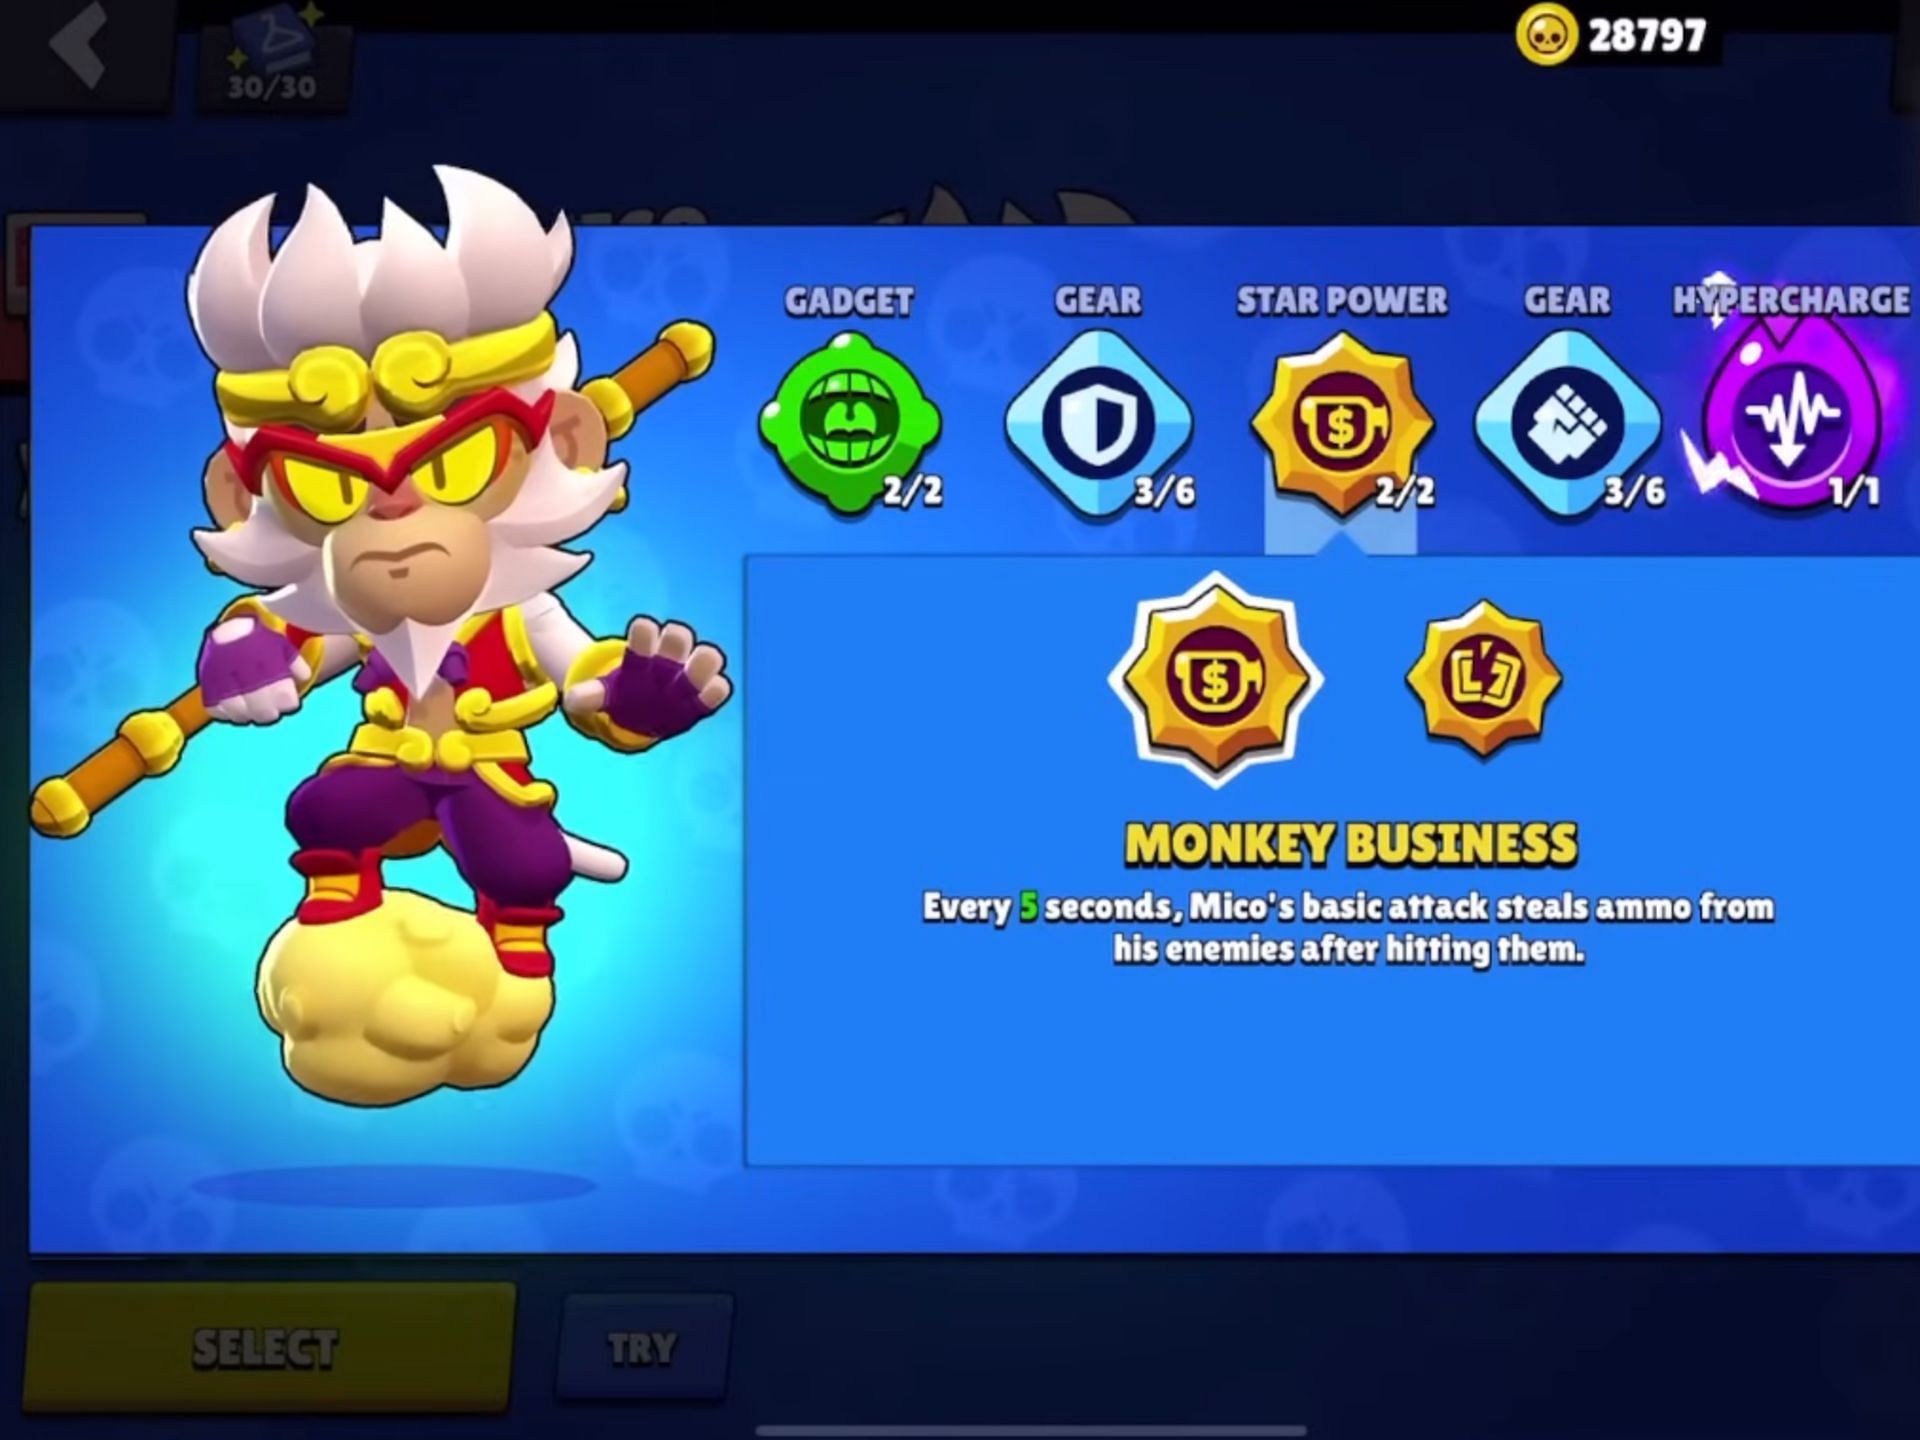 Monkey Business Star Power (Image via Supercell)